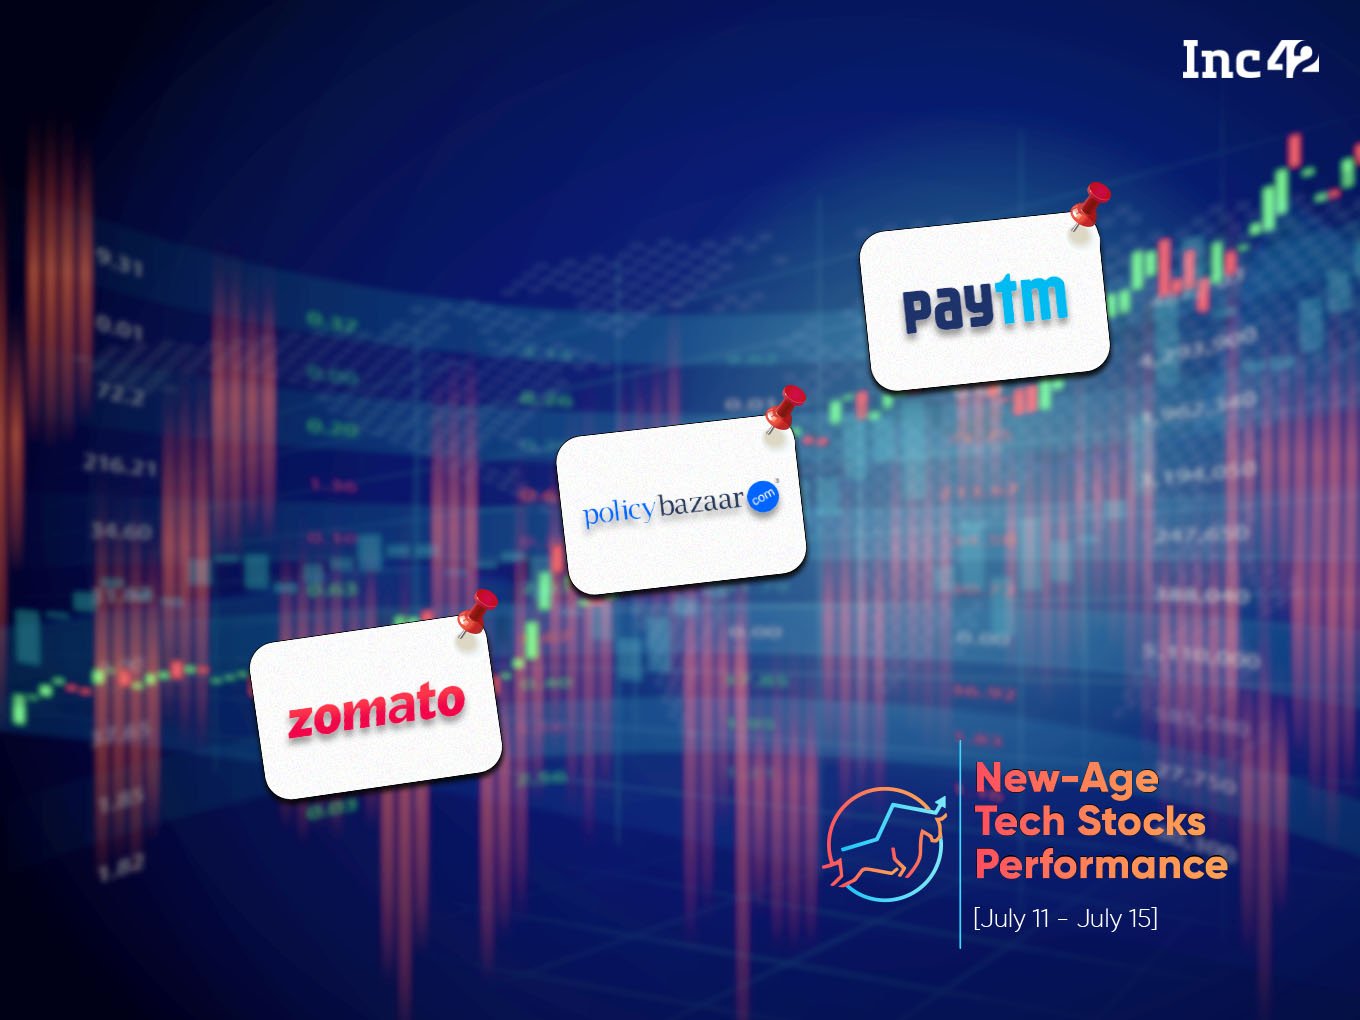 Weekly Performance Of New-Age Tech Stocks: Paytm Surges, Policybazaar Among Biggest Losers